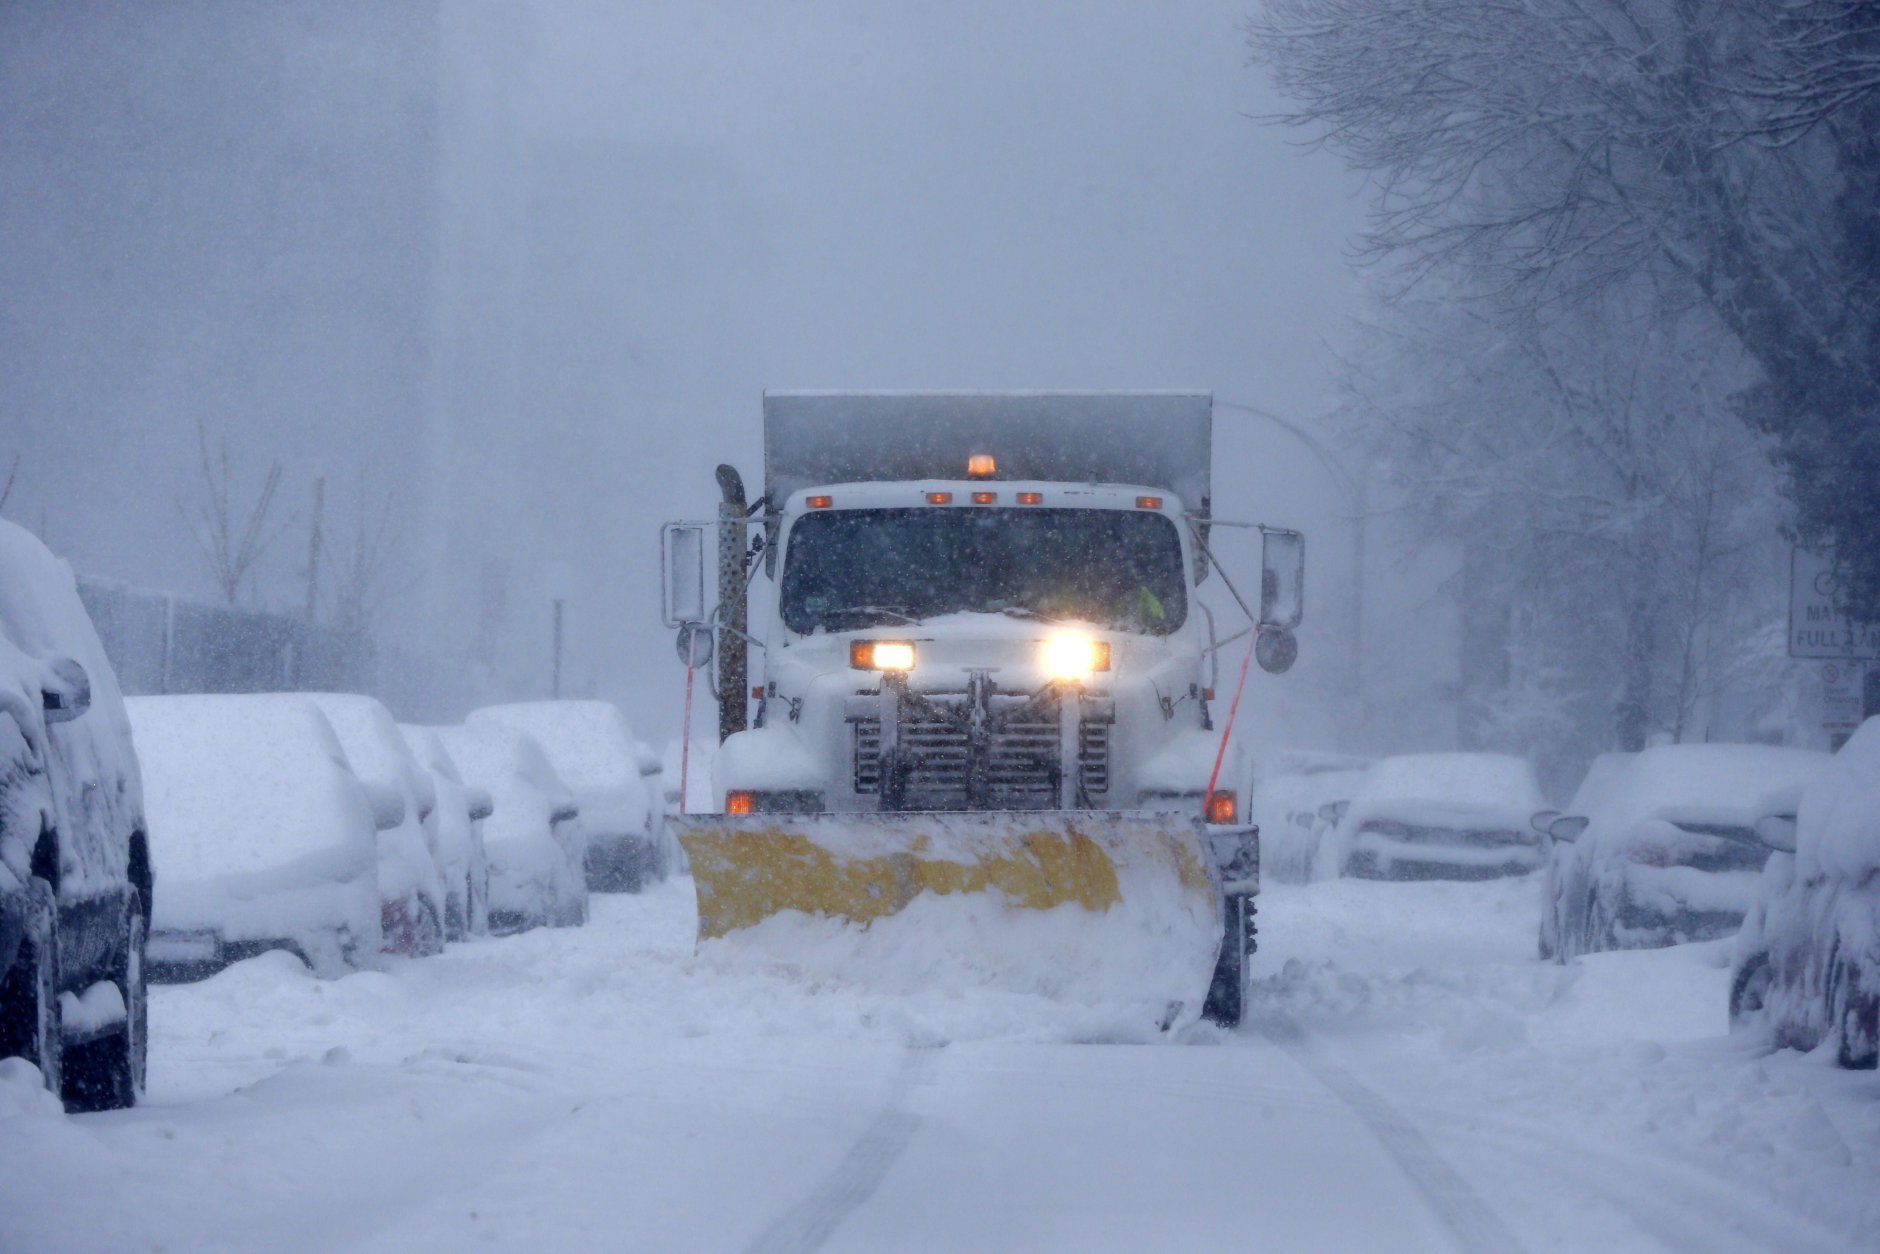 A plow clears Marginal Street in Boston, Tuesday, March 13, 2018. Boston finds itself in the bullseye of the third nor'easter in two weeks, with forecasters warning of up to 18 inches of snow and 2 feet or more to the south. (AP Photo/Michael Dwyer)